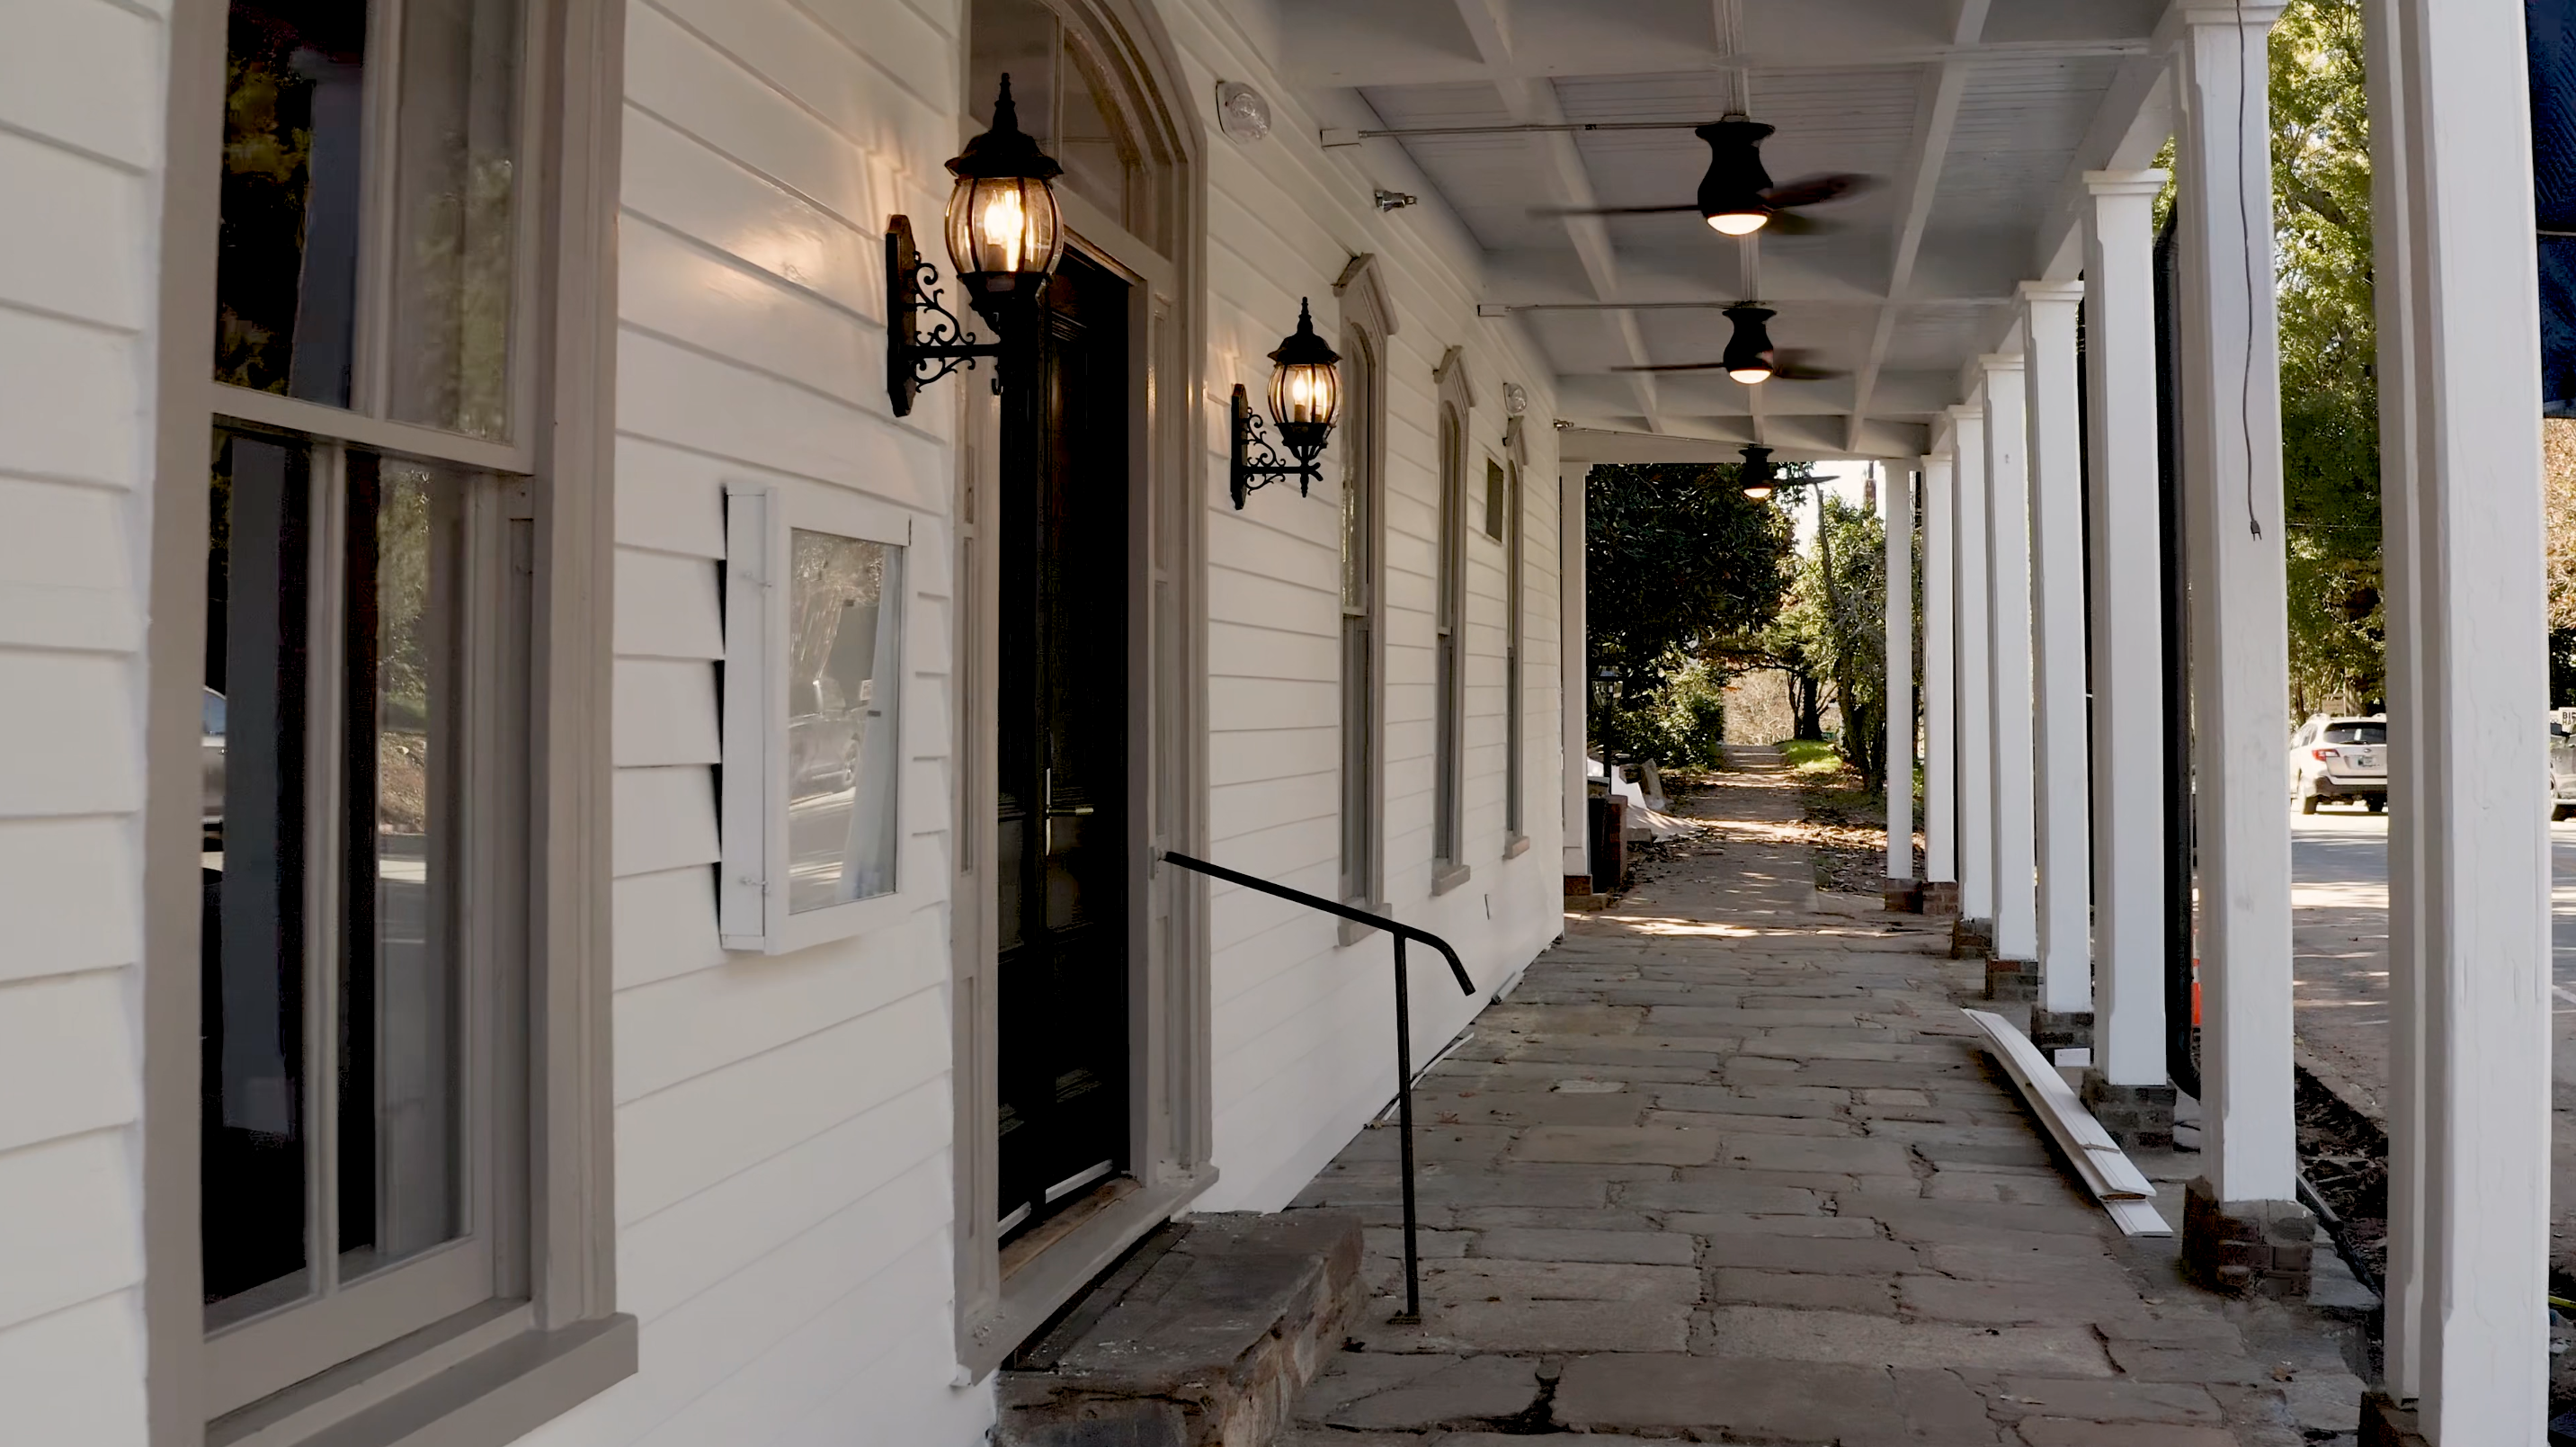 Hillsborough S Colonial Inn Announces Grand Opening Date After Years Of Renovation Chapelboro Com